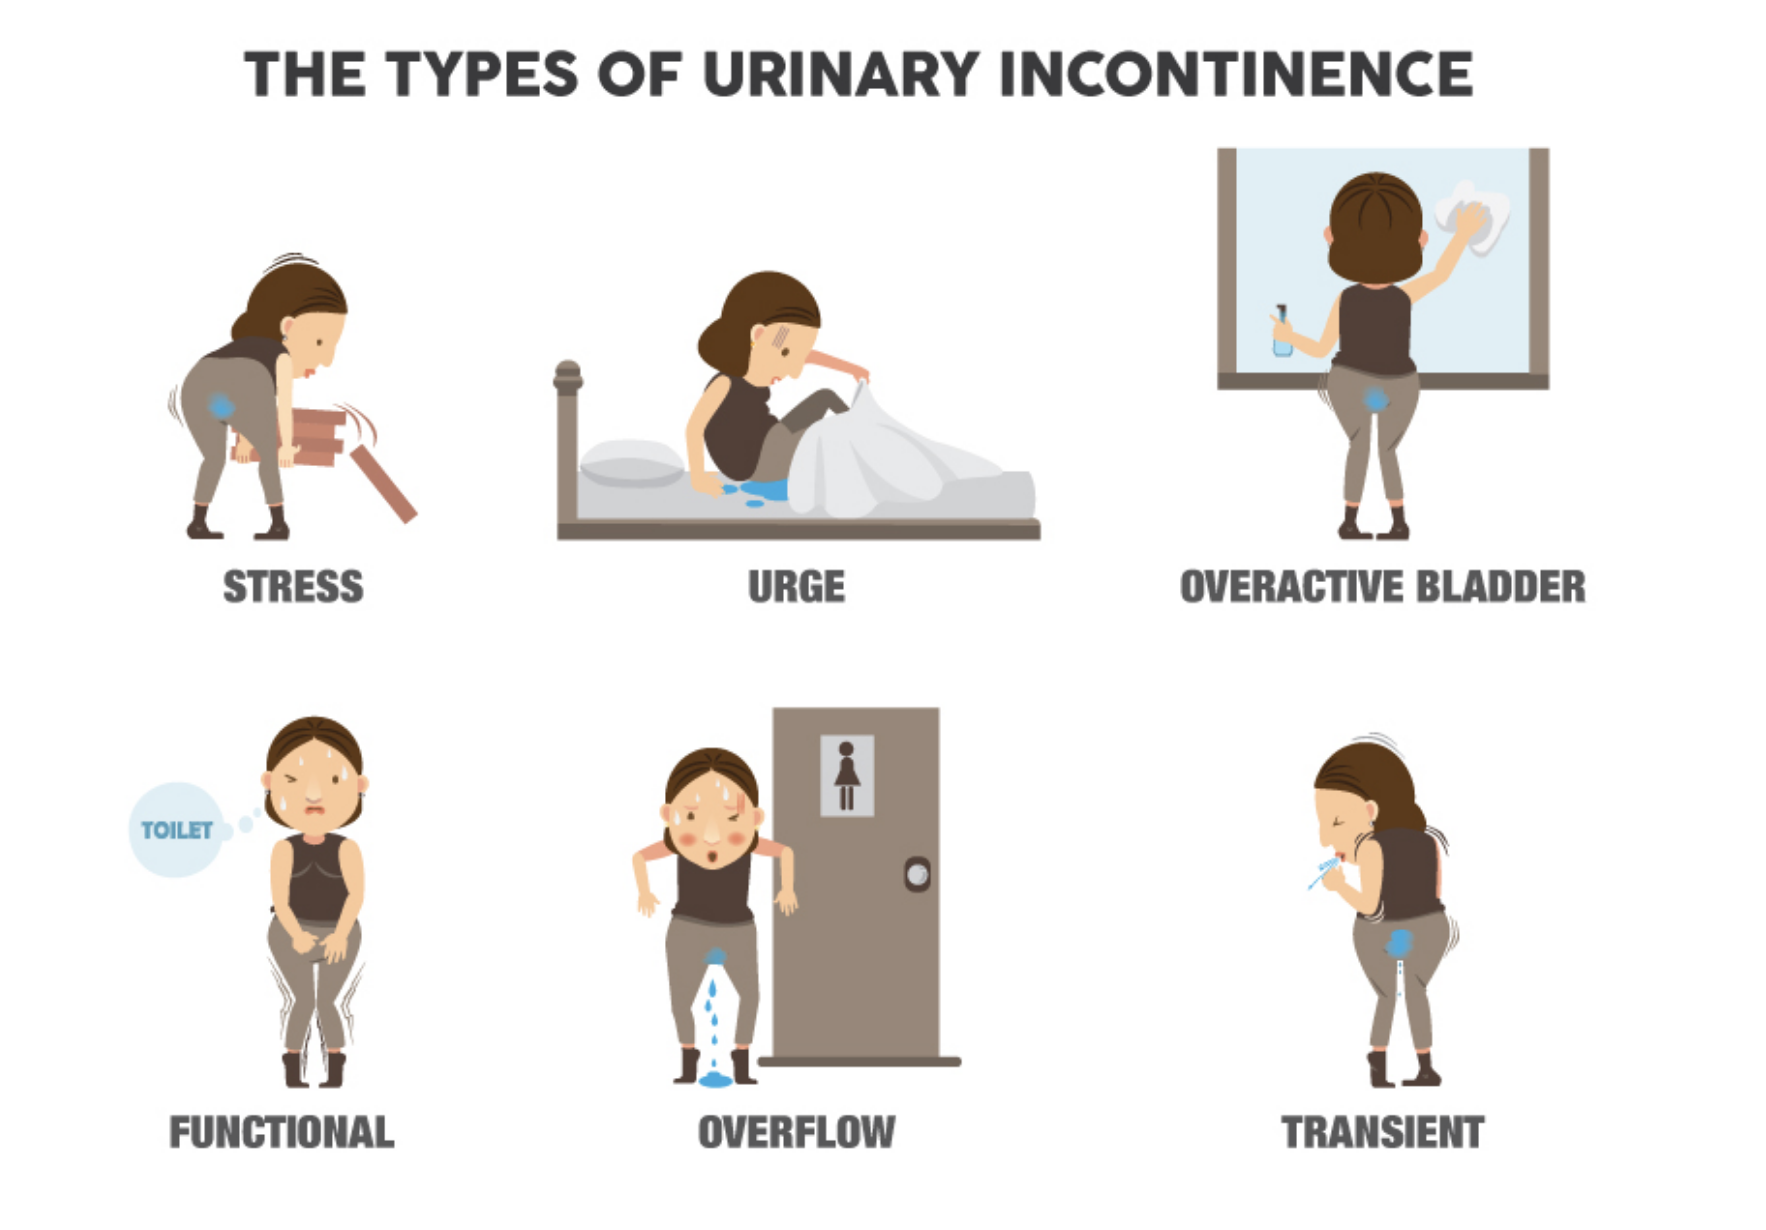 Type+of+urinary+incontinence+graphic